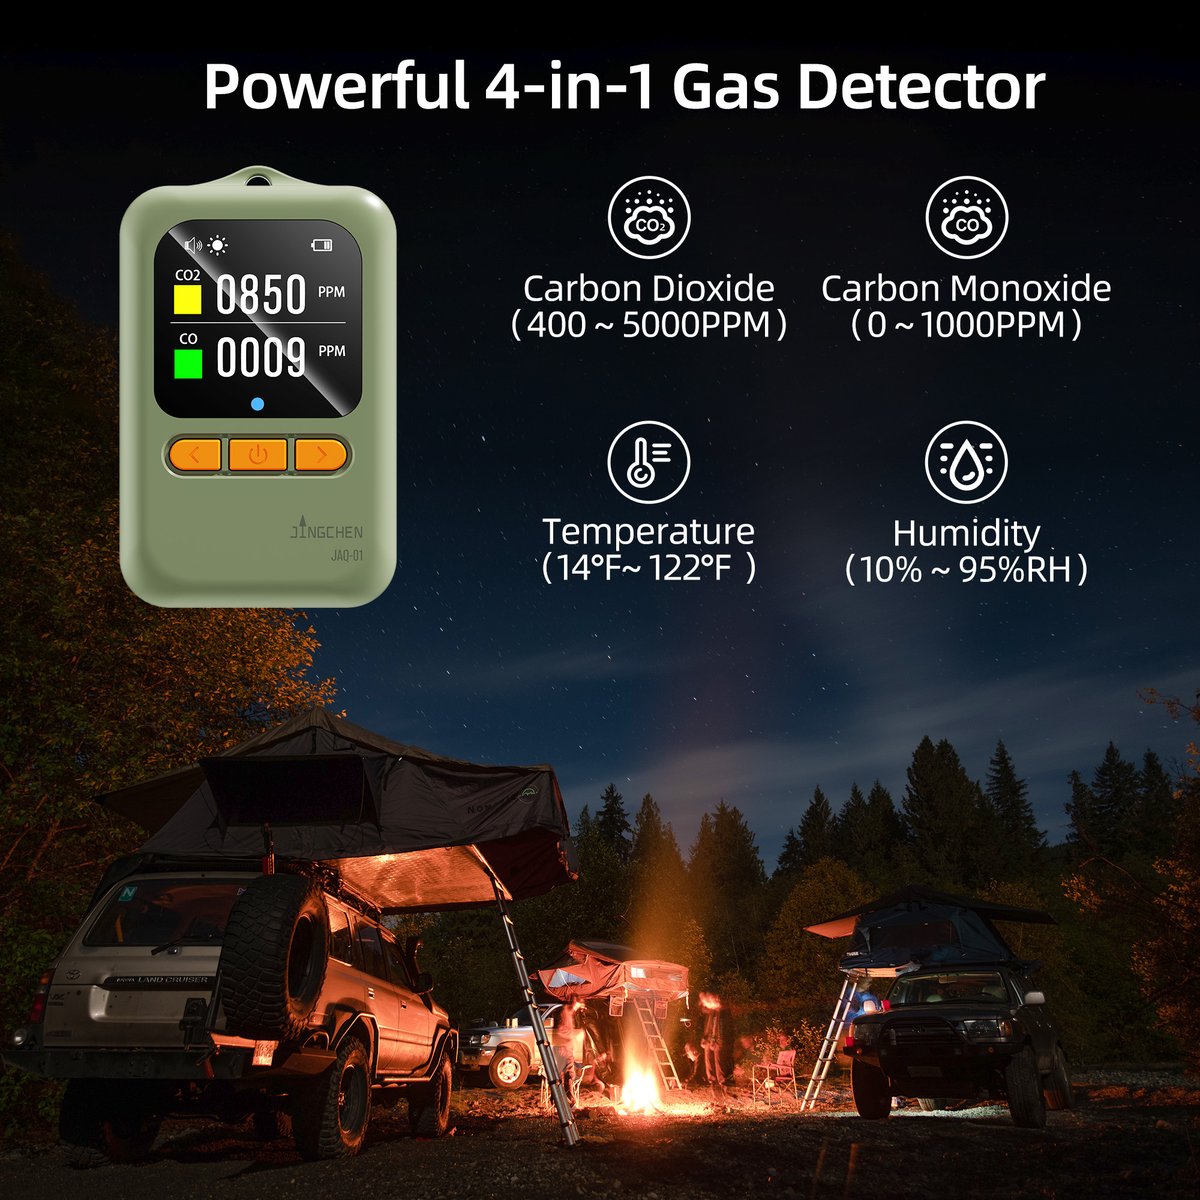 When you go camping, this is a little something you must put in your backpack. It will keep you safe from the colorless, odorless, hidden killer-carbon monoxide.#camp #vancamp #carbonmonoxide #carbondioxide